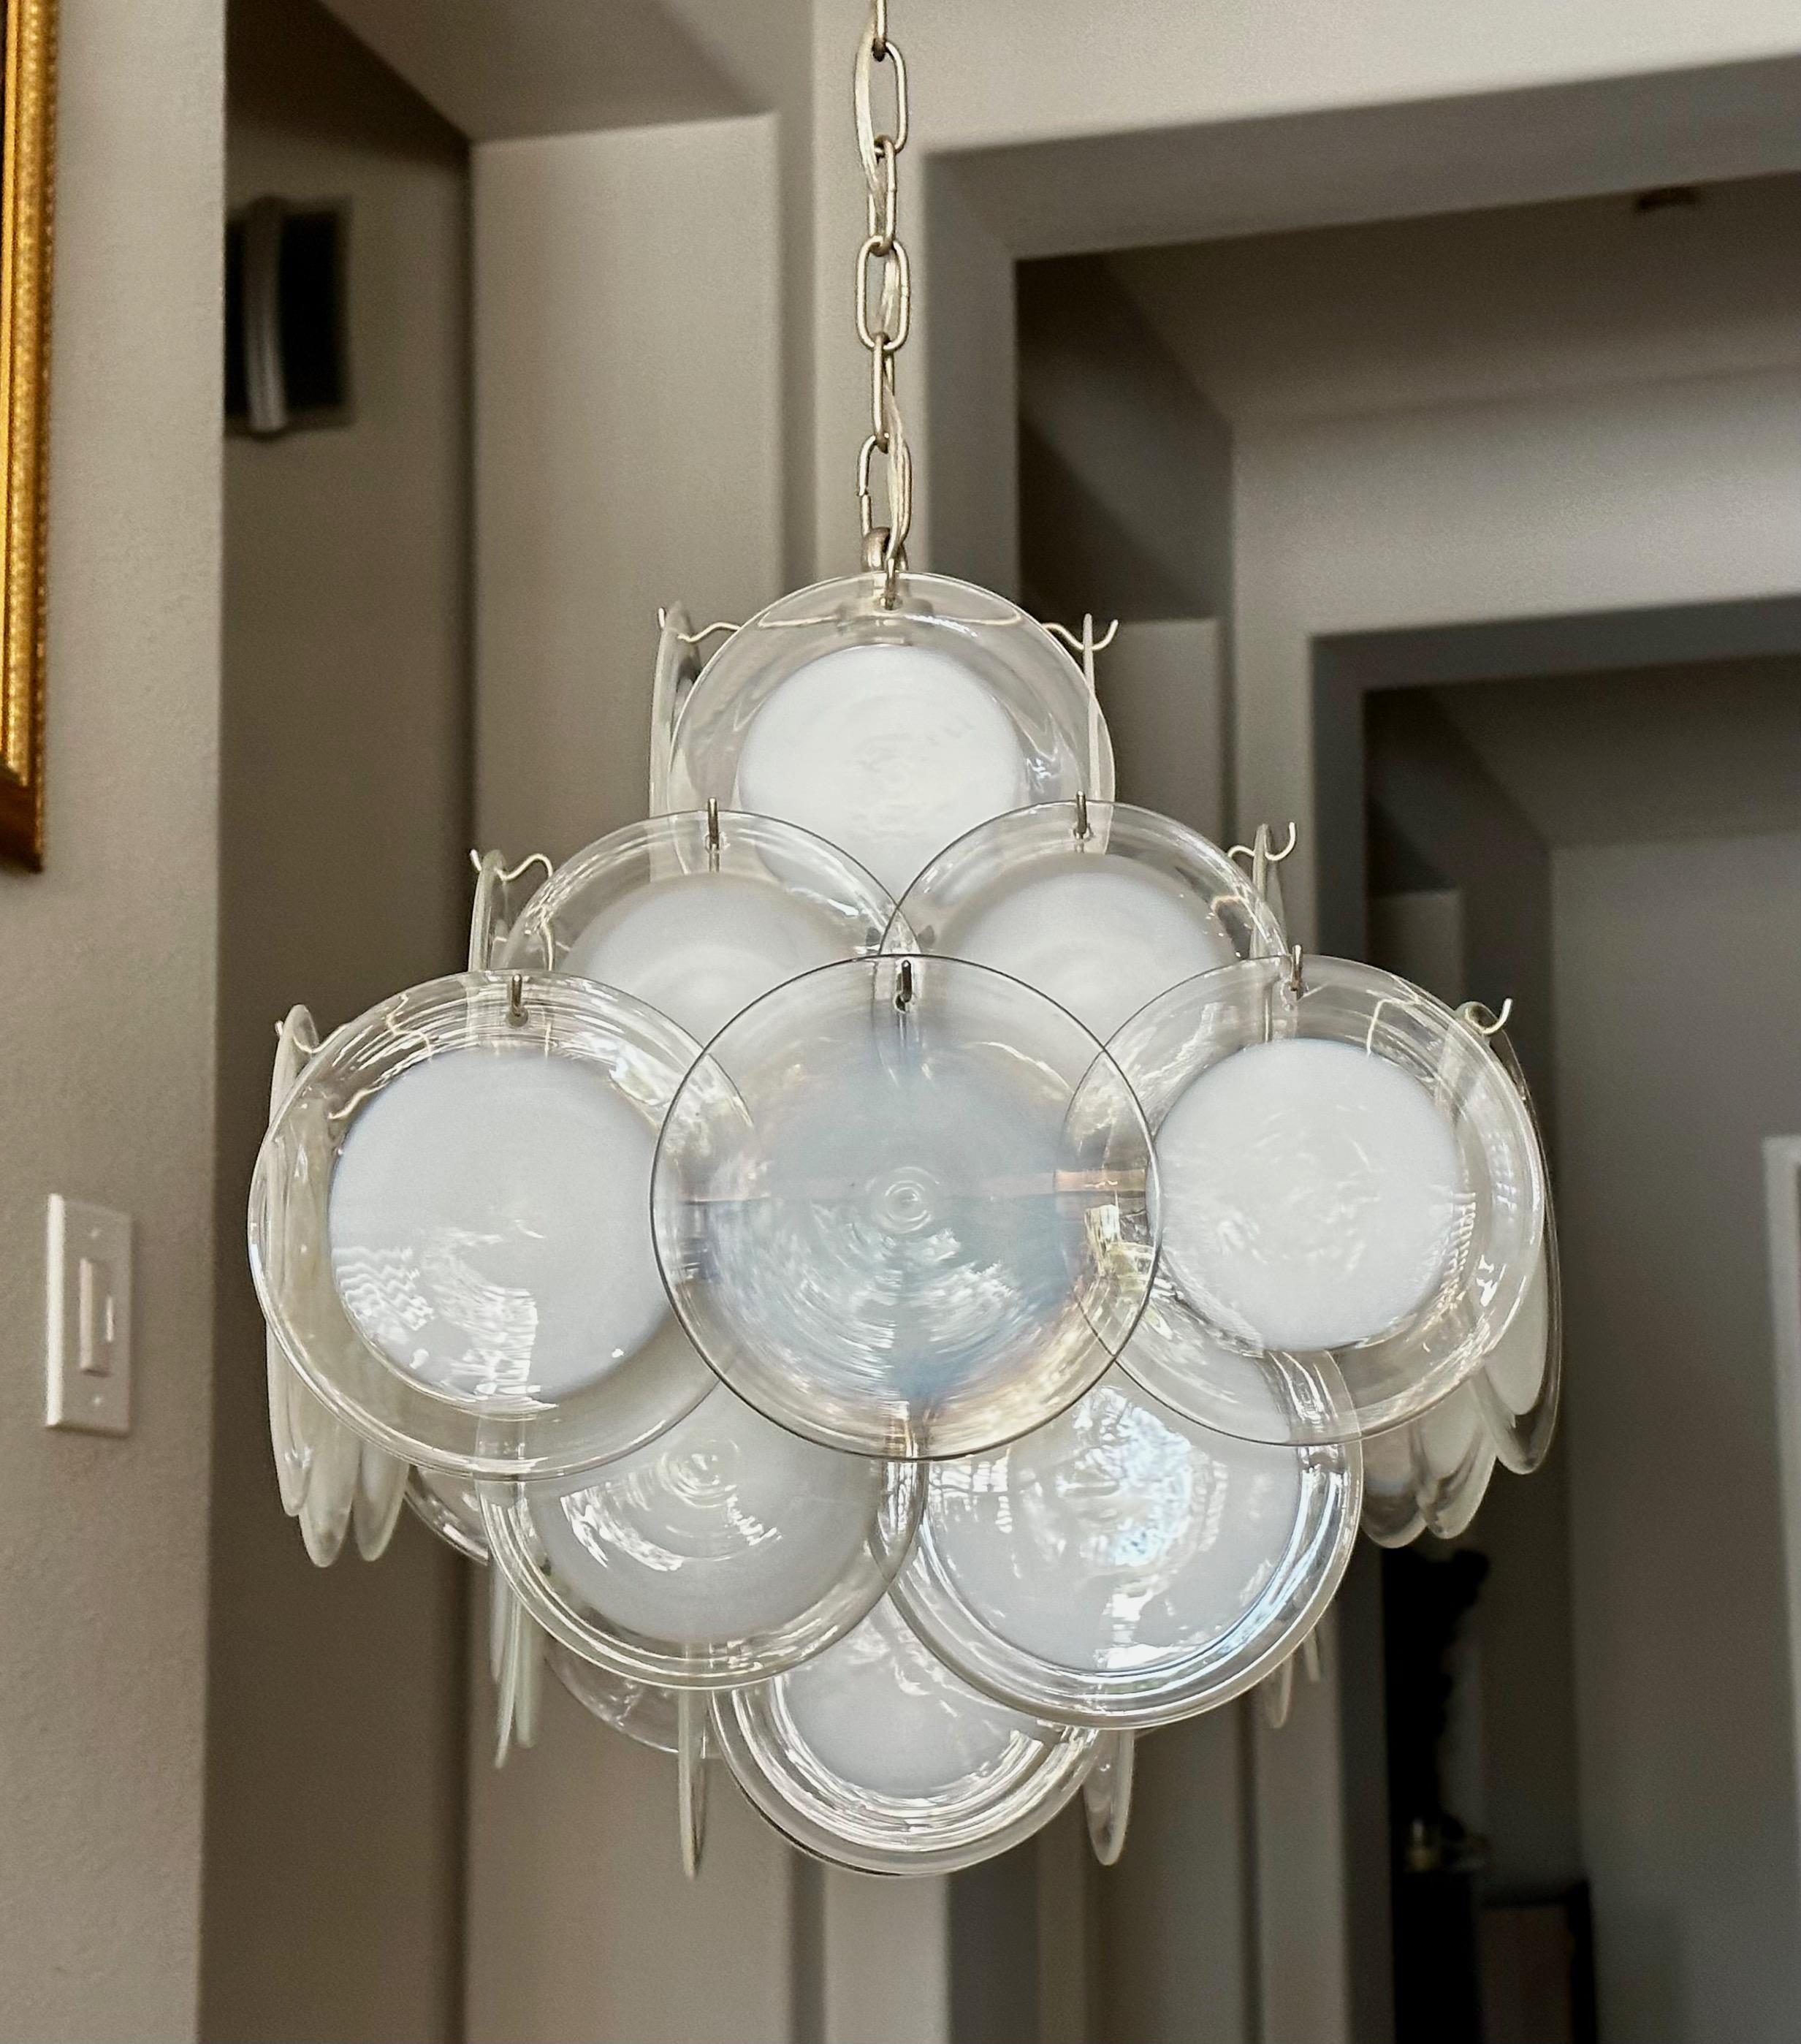 Vistosi Murano glass 4 light chandelier with alternating clear & white plus white opalescent round discs. The steel frame has 4 candelabra size bulbs. The diagonal length is 23